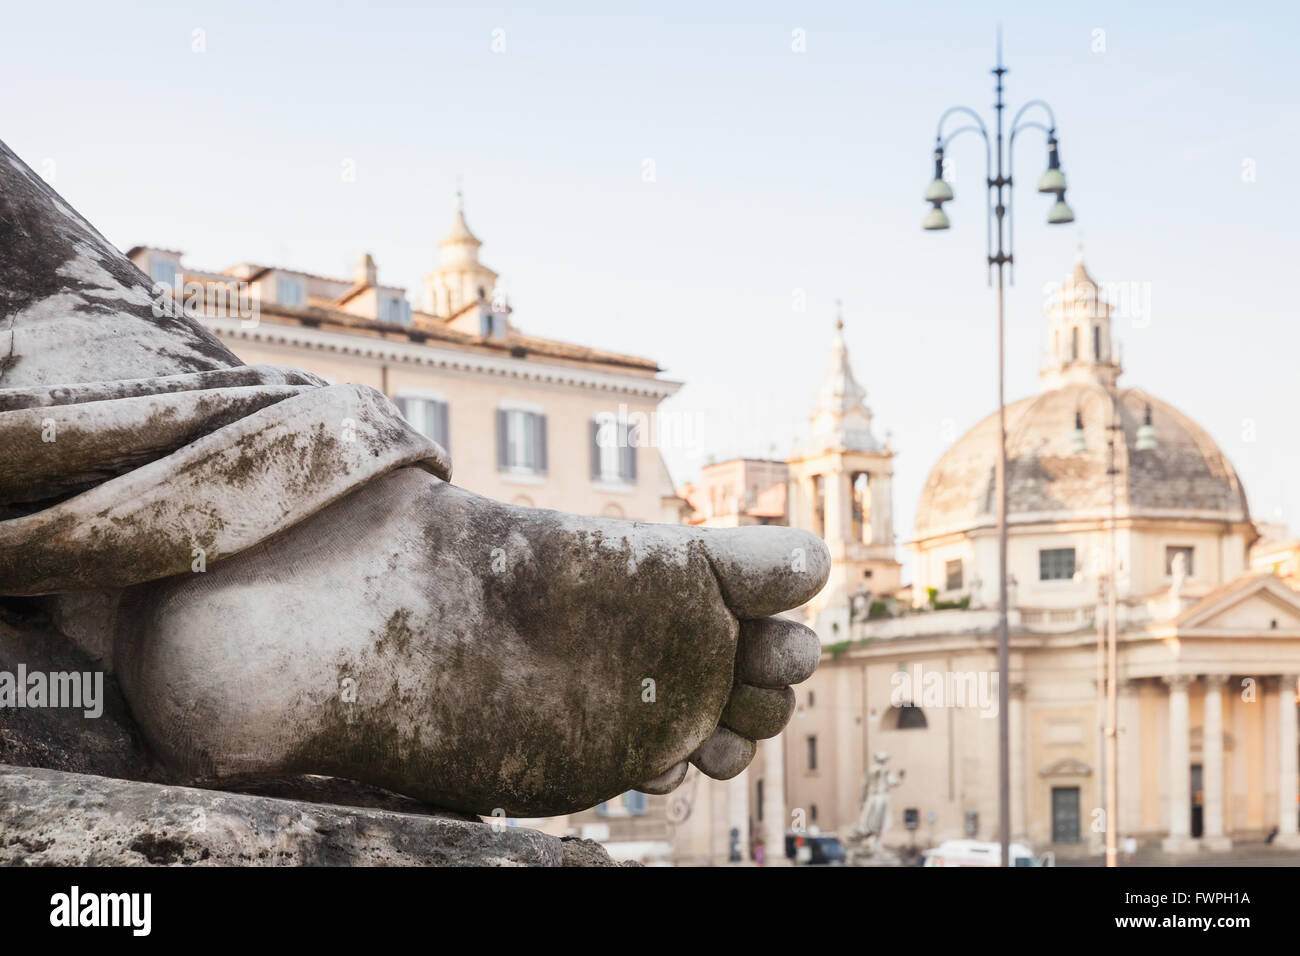 Dirty human leg, Fragment of ancient sculpture on the Piazza del Popolo square, old city center of Rome, Italy Stock Photo